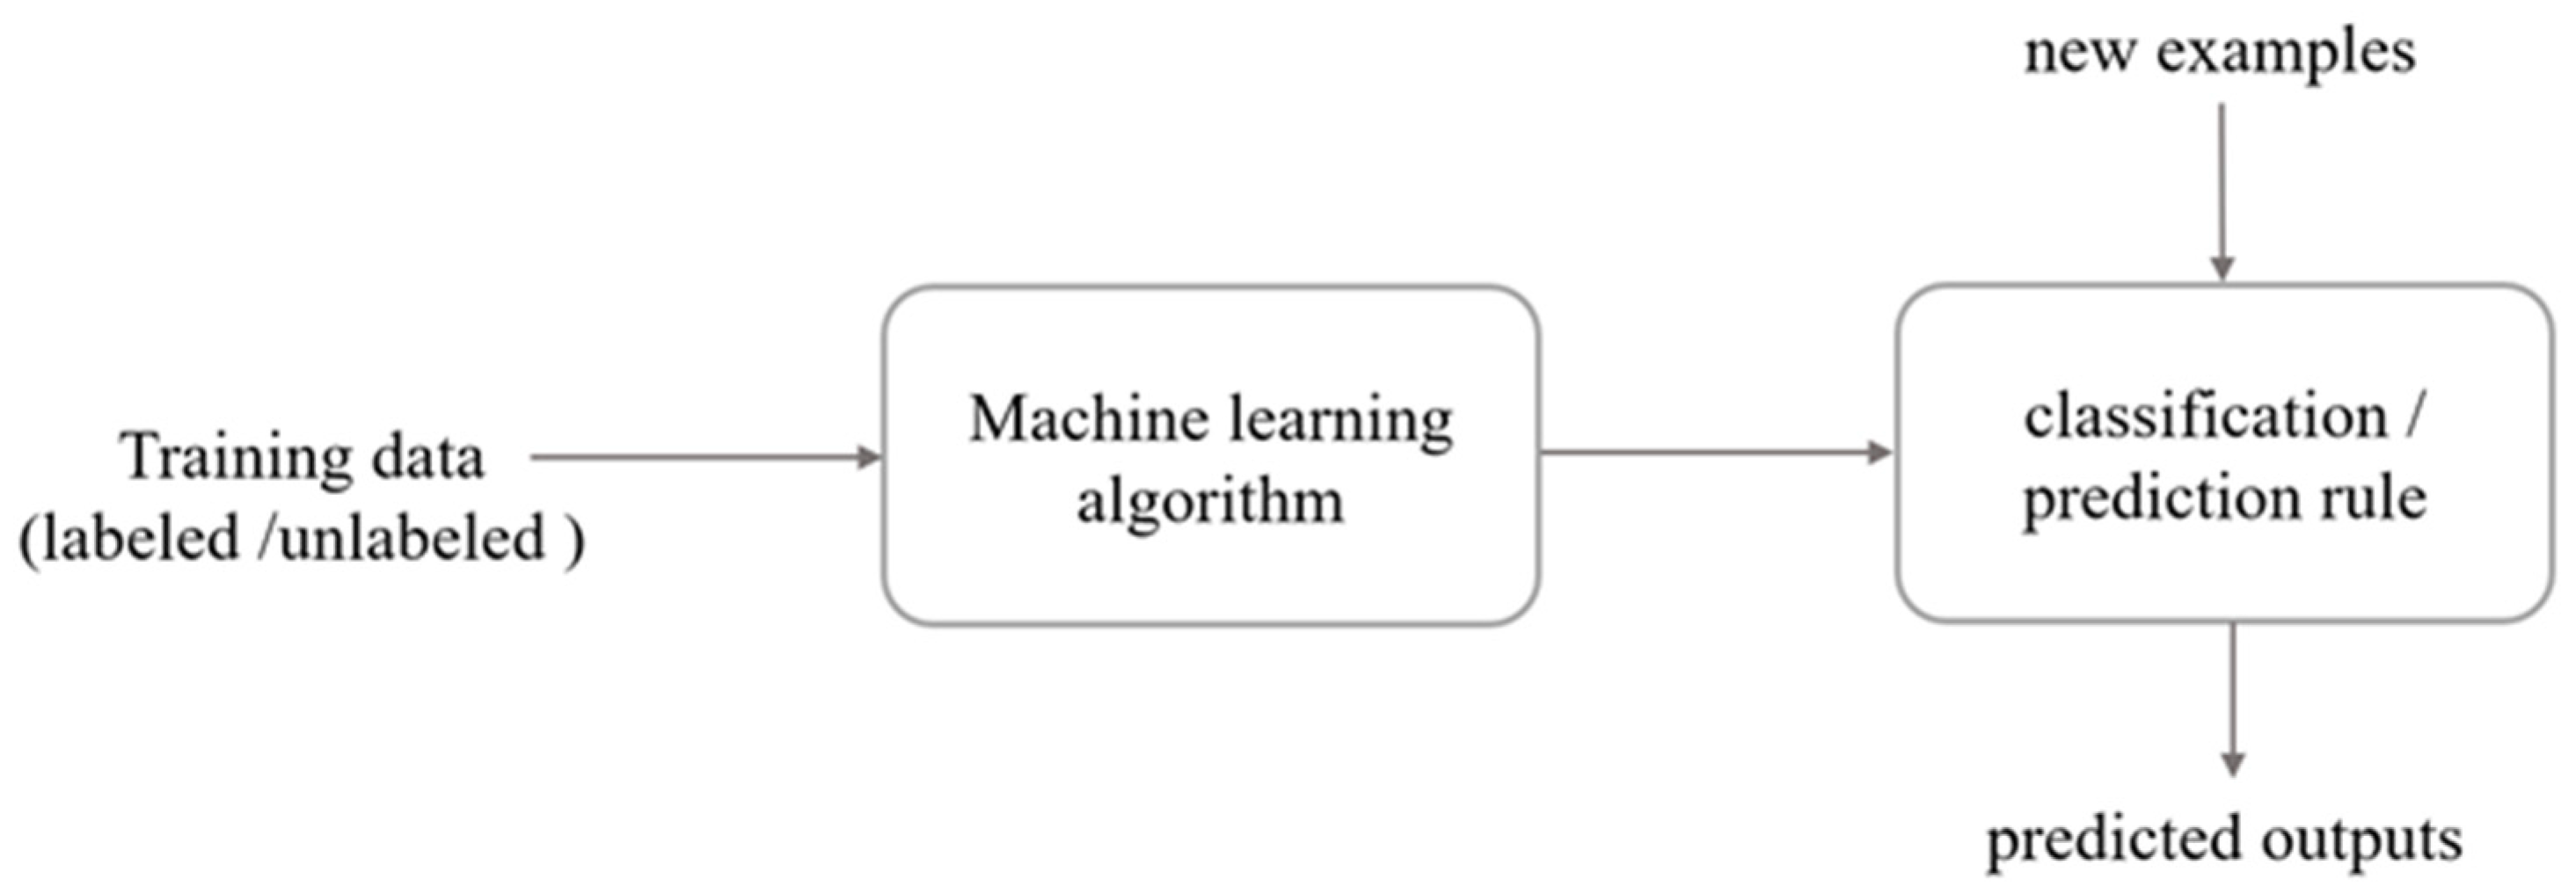 3 Before you model: planning and scoping - Machine Learning